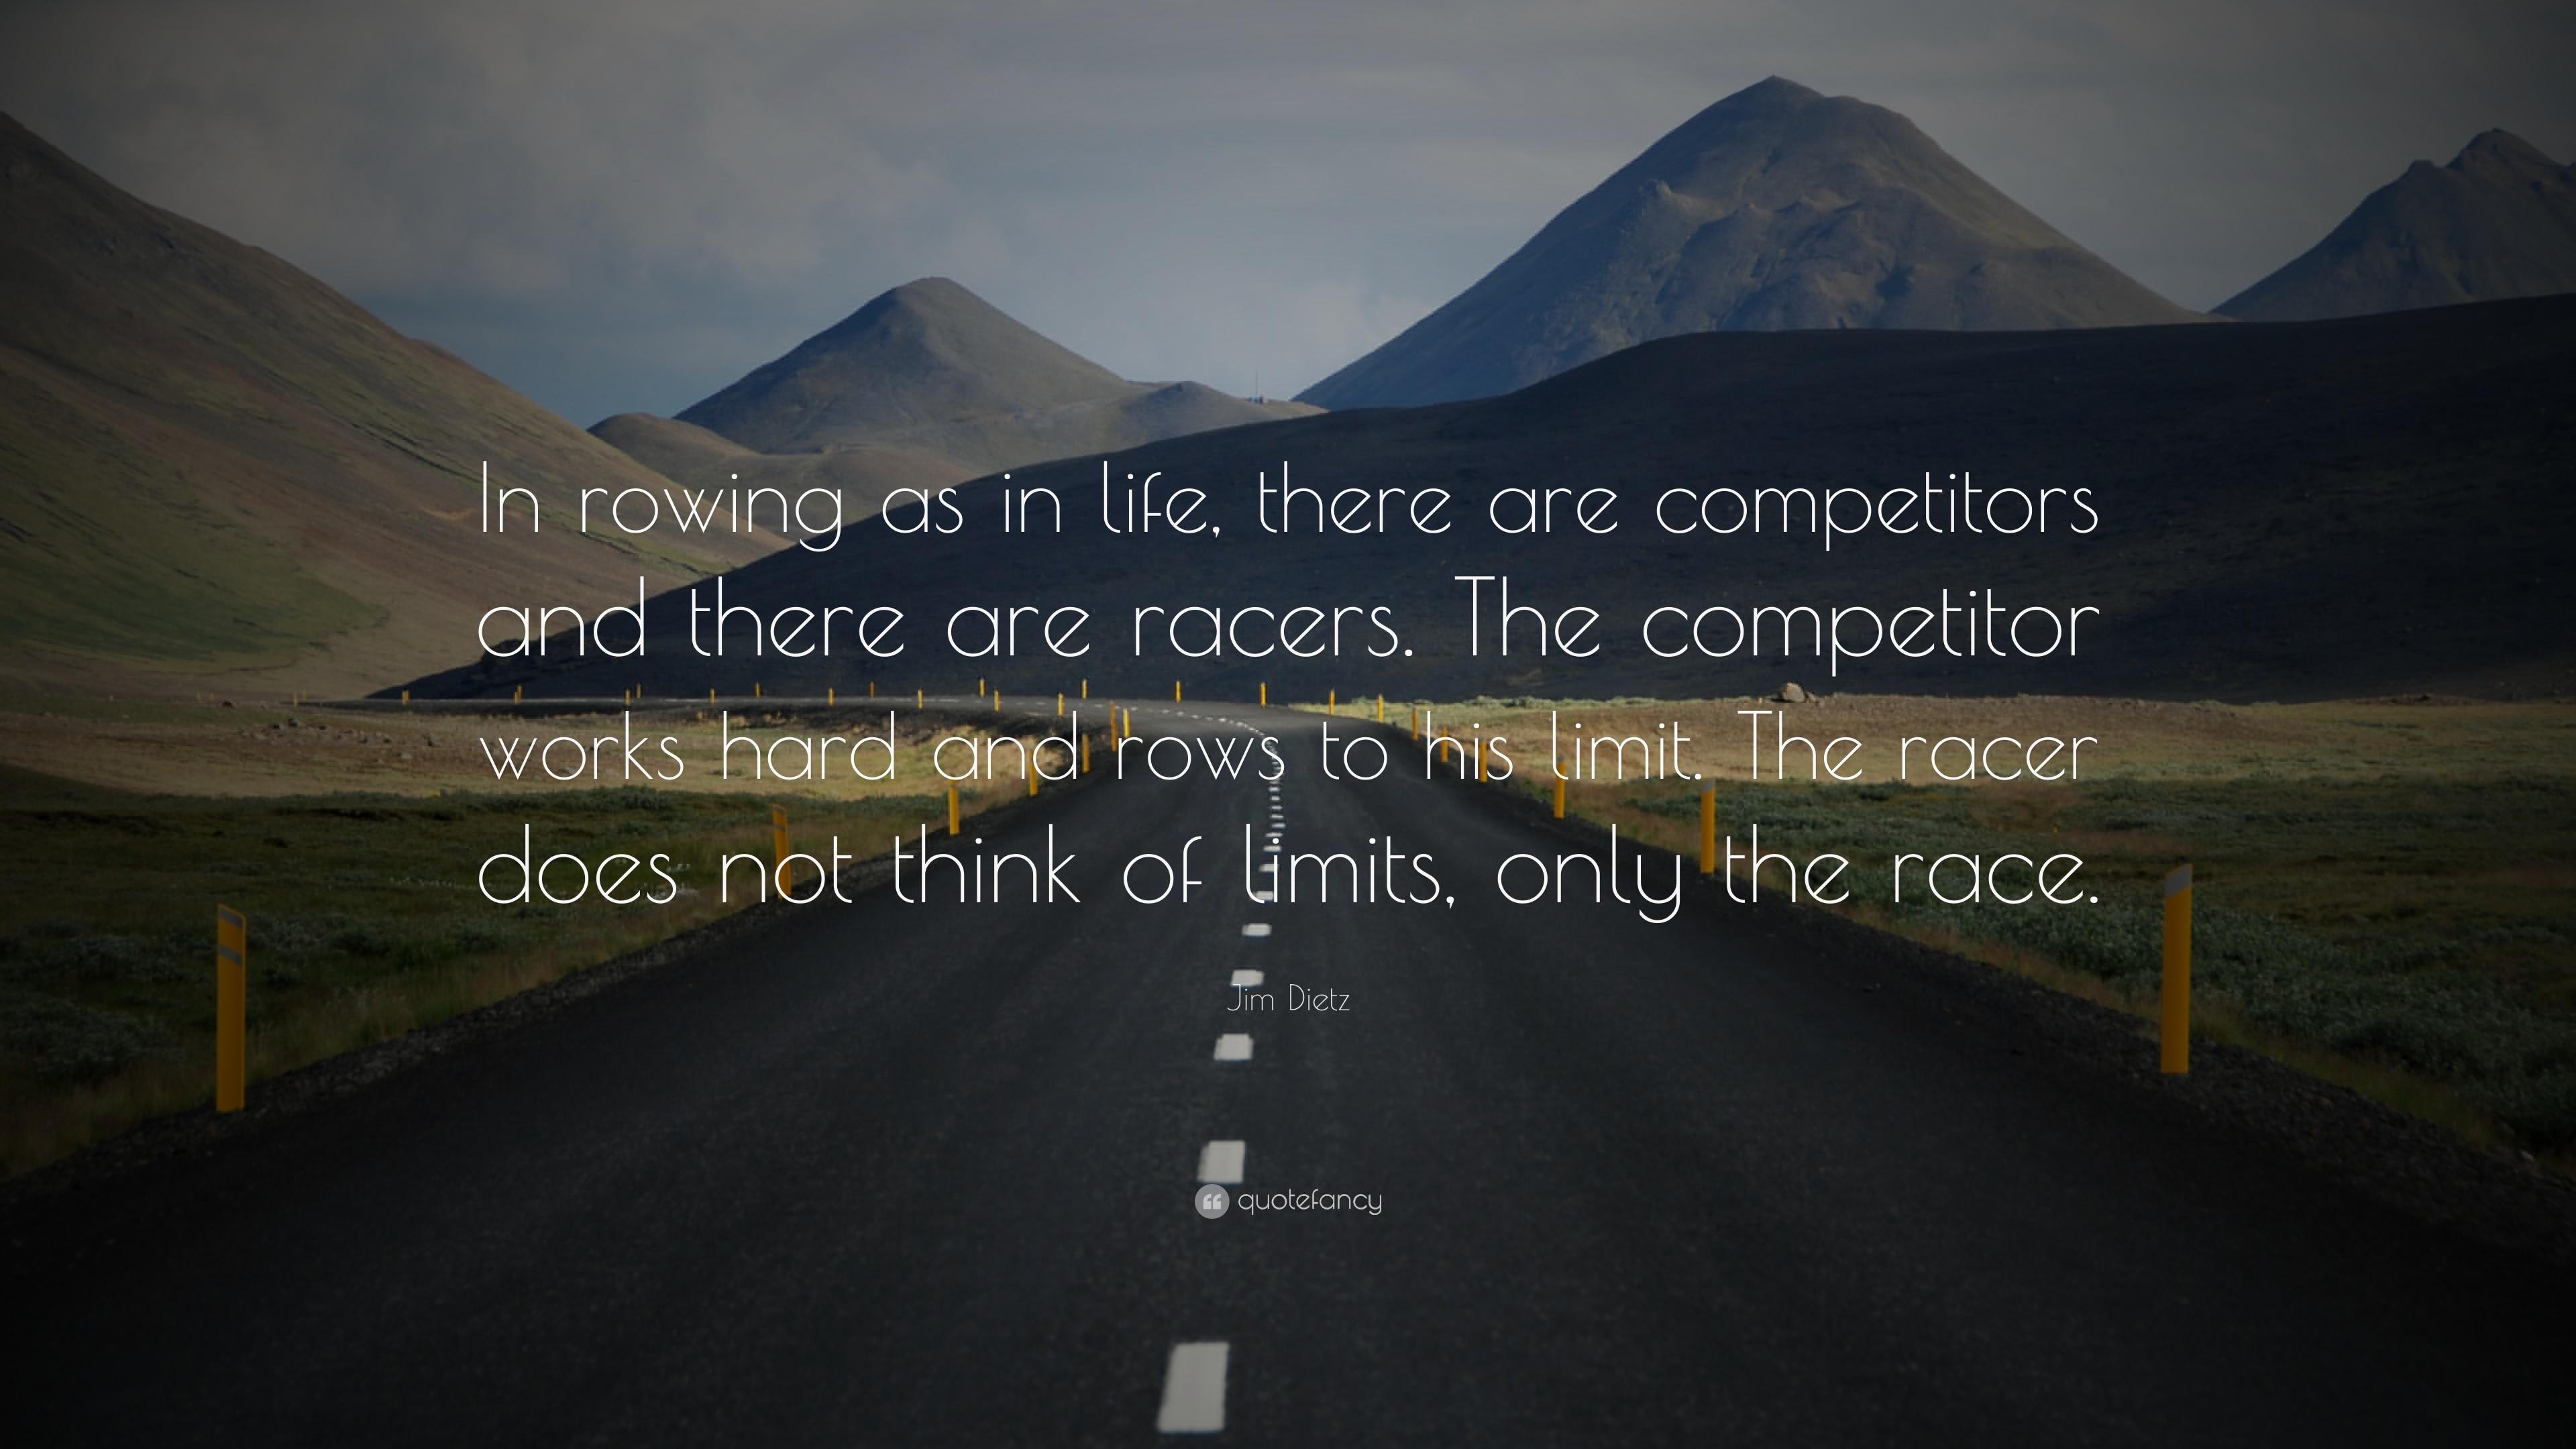 Jim Dietz Quote: “In rowing as in life, there are competitors